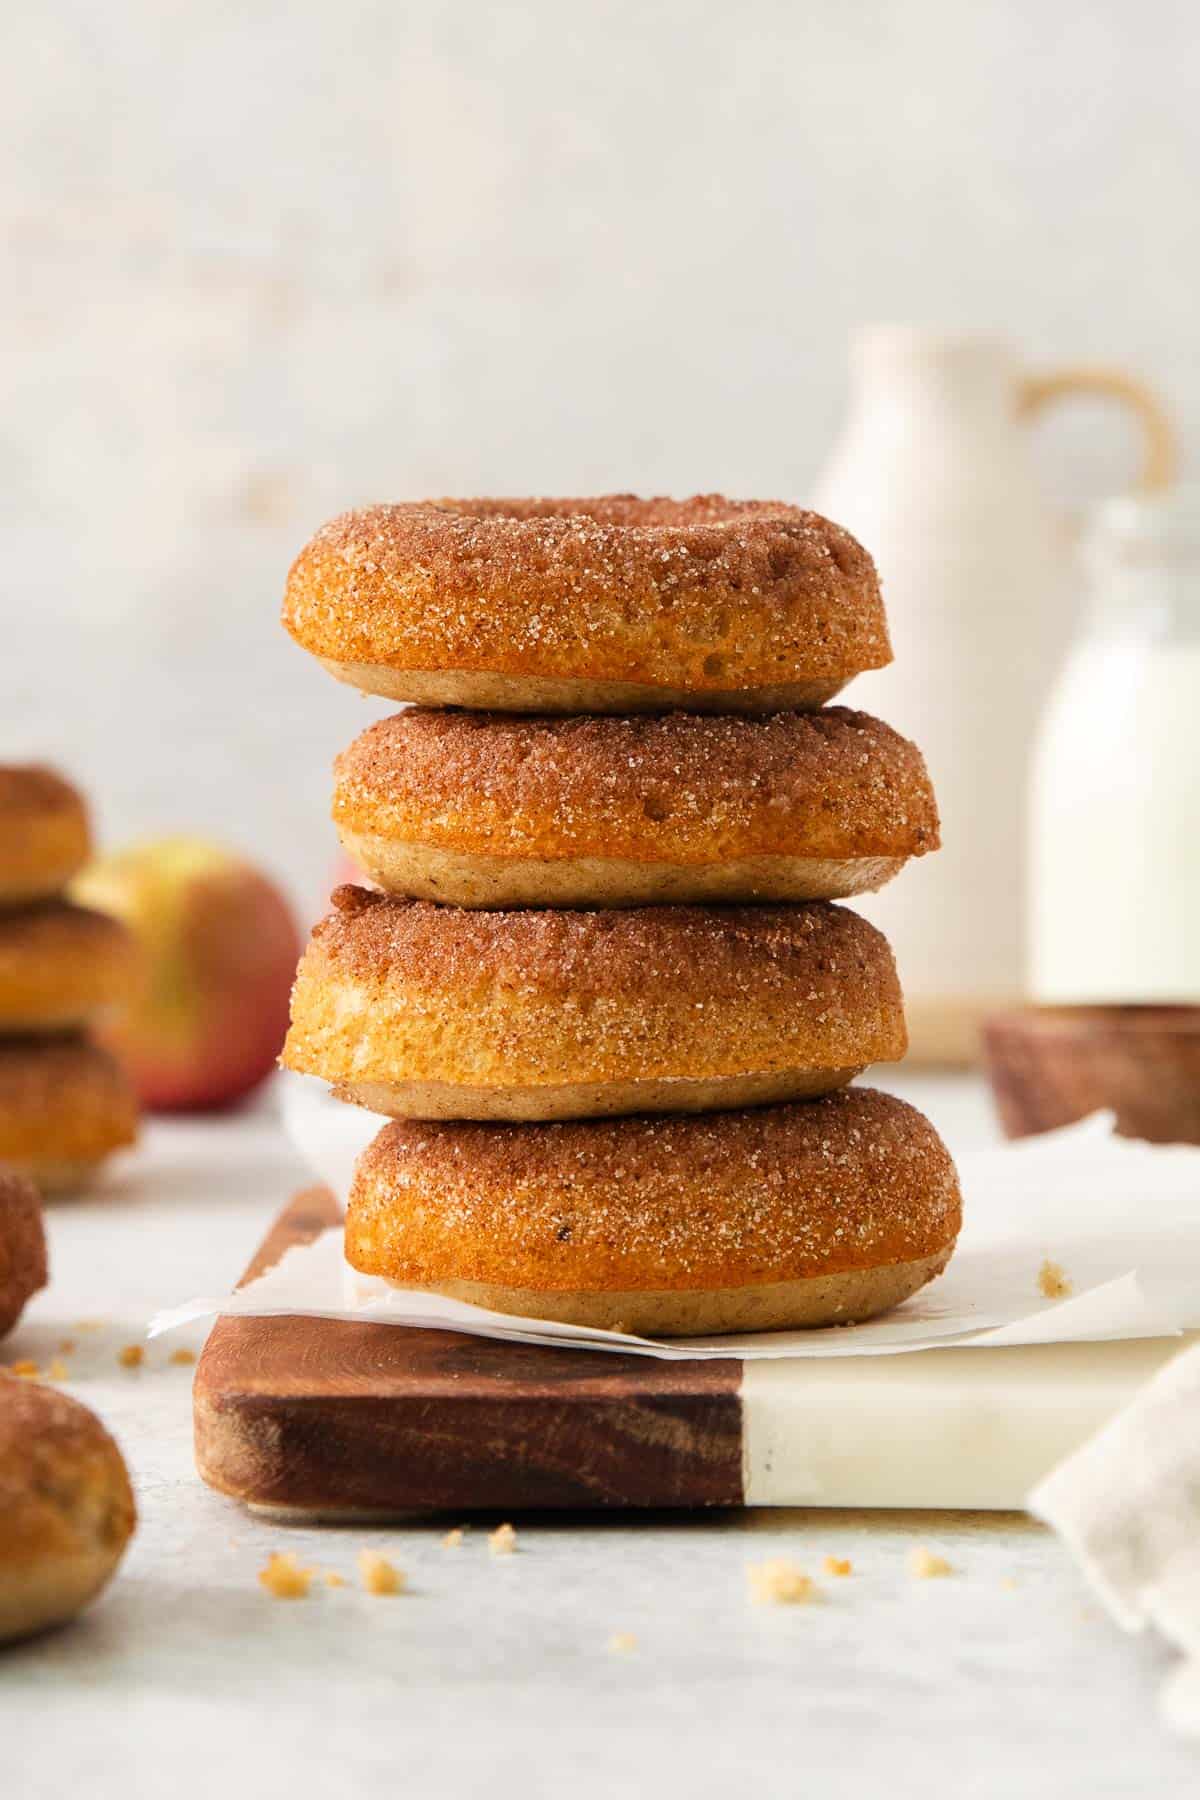 Gluten-free apple cider donuts stacked on a wooden board